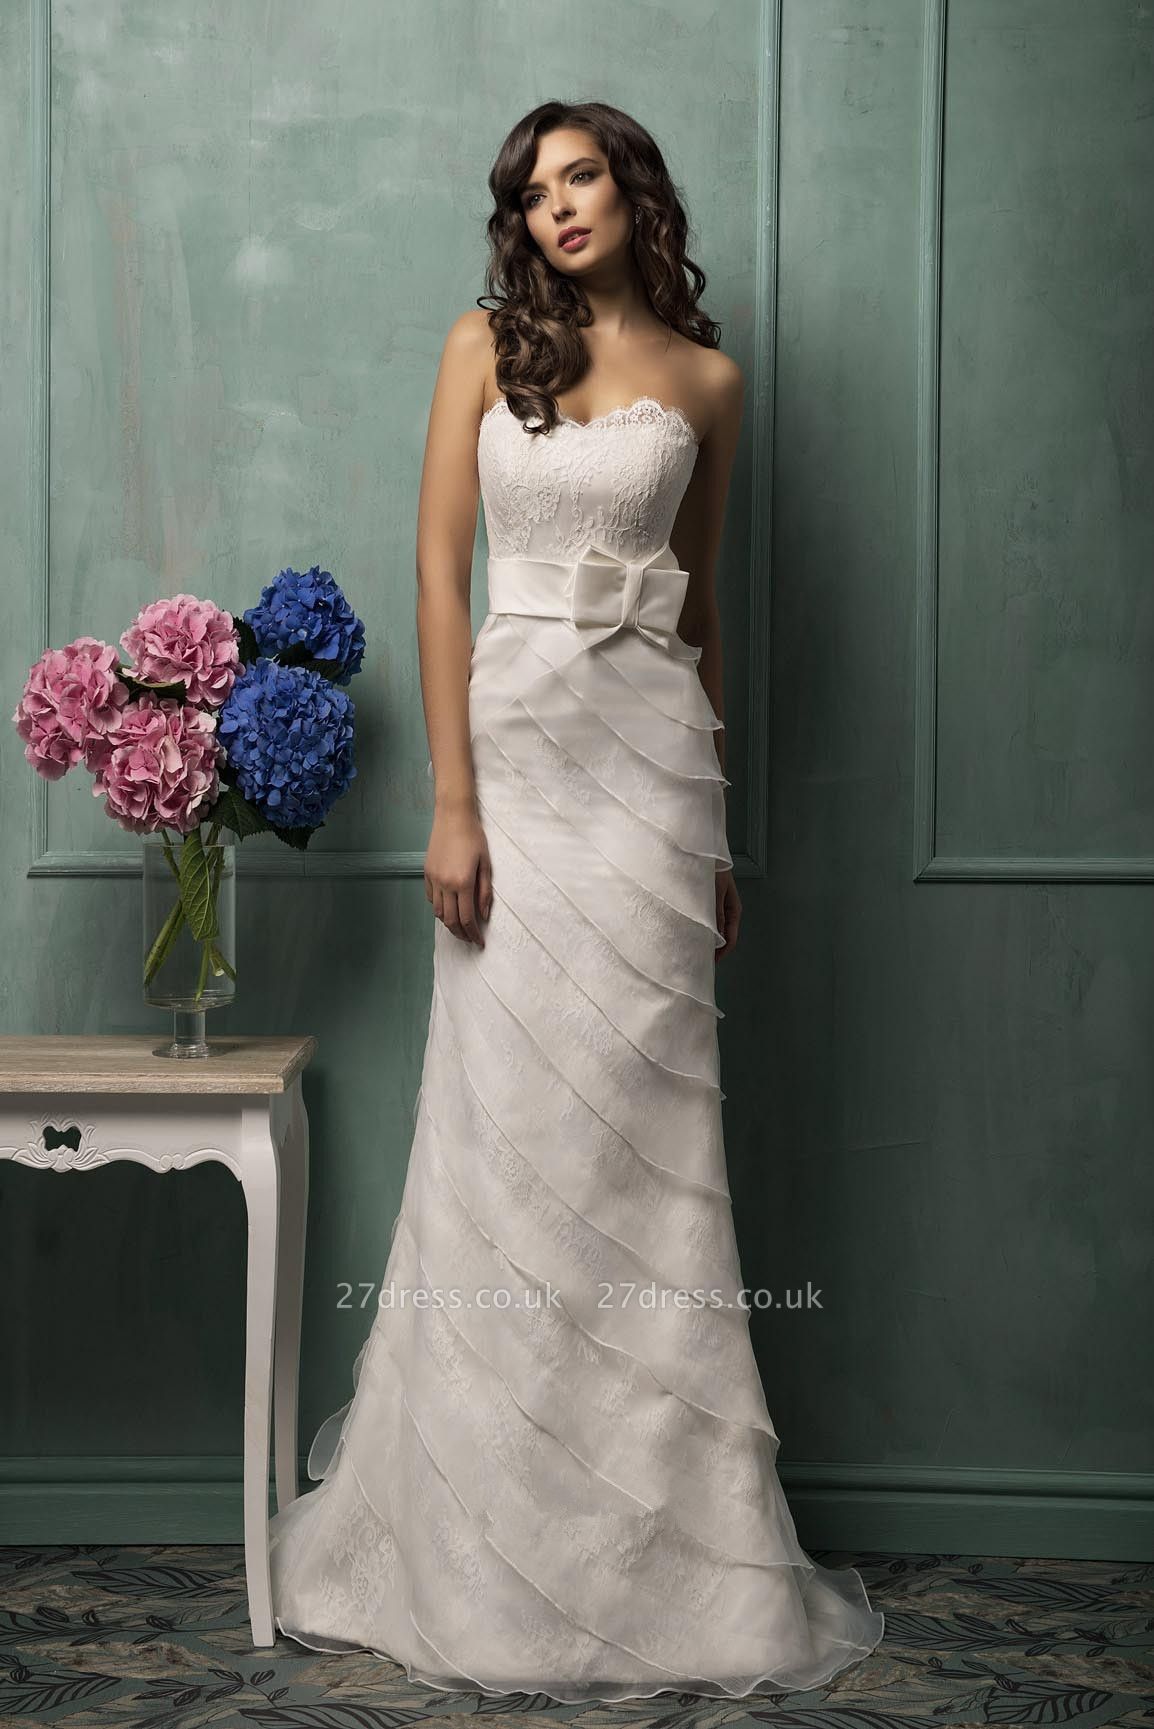 Modern Sweetheart Sleeveless A-line Wedding Dress With Lace Appliques